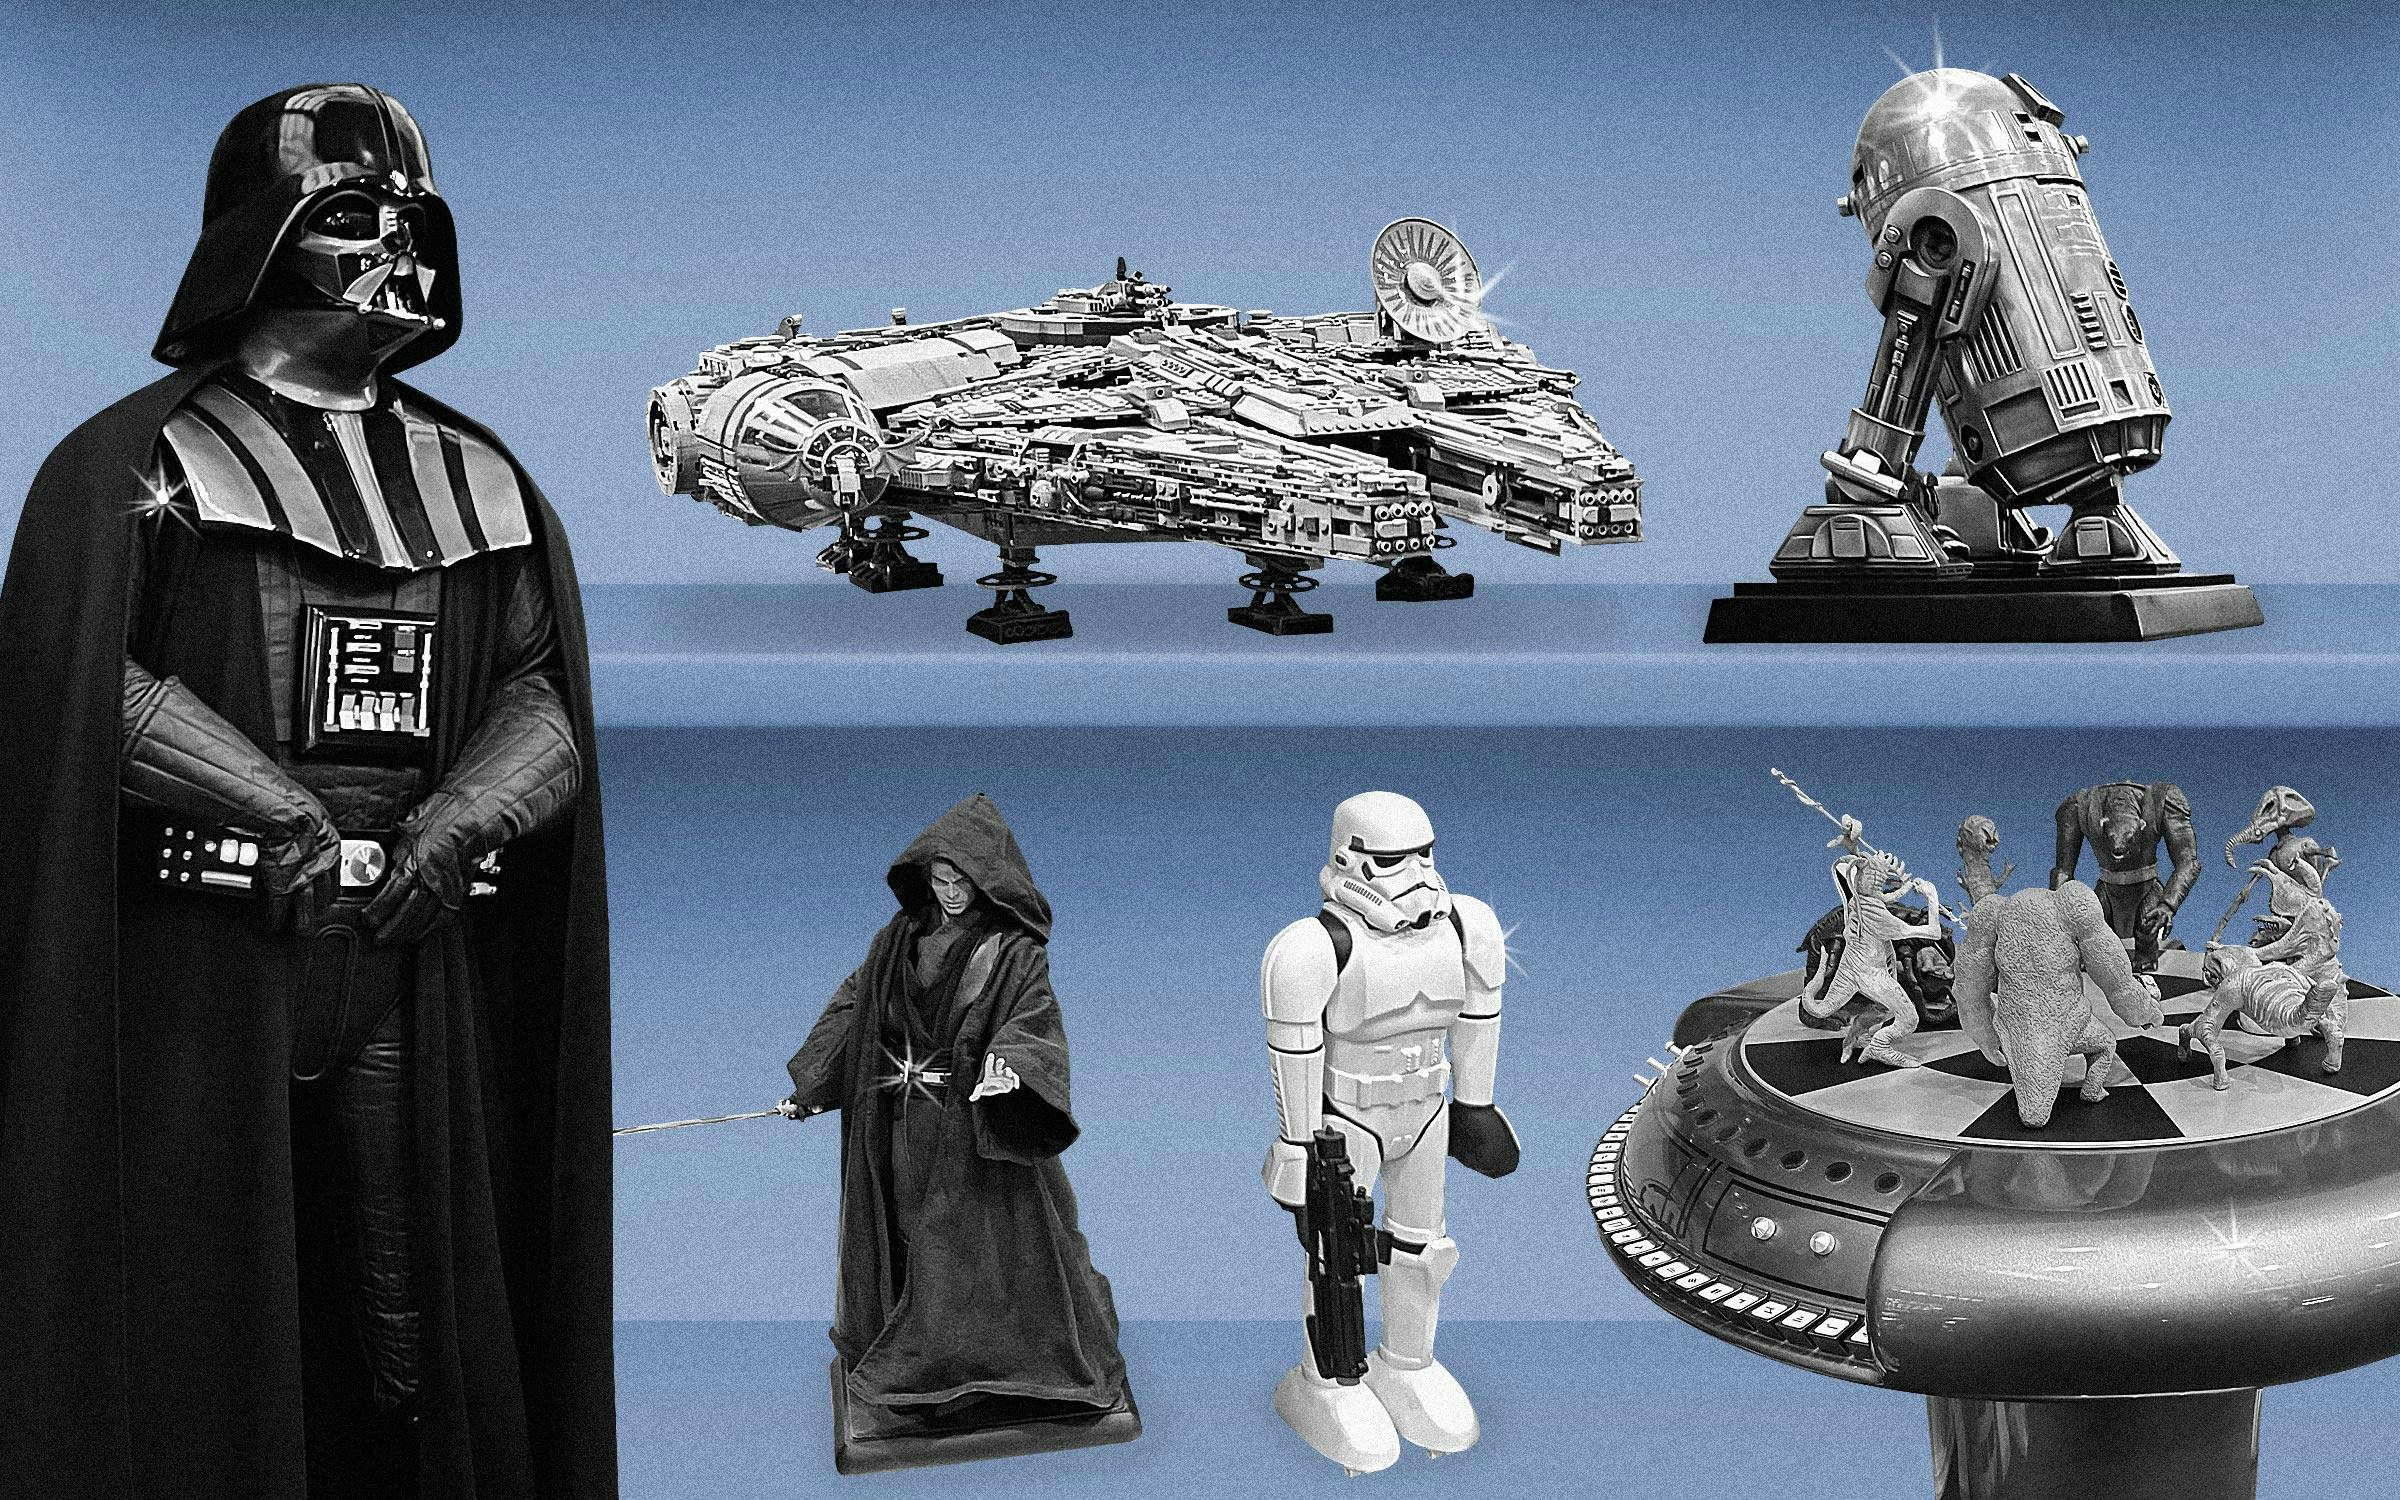 For investors, 'Star Wars' collectibles aren't what they used to be